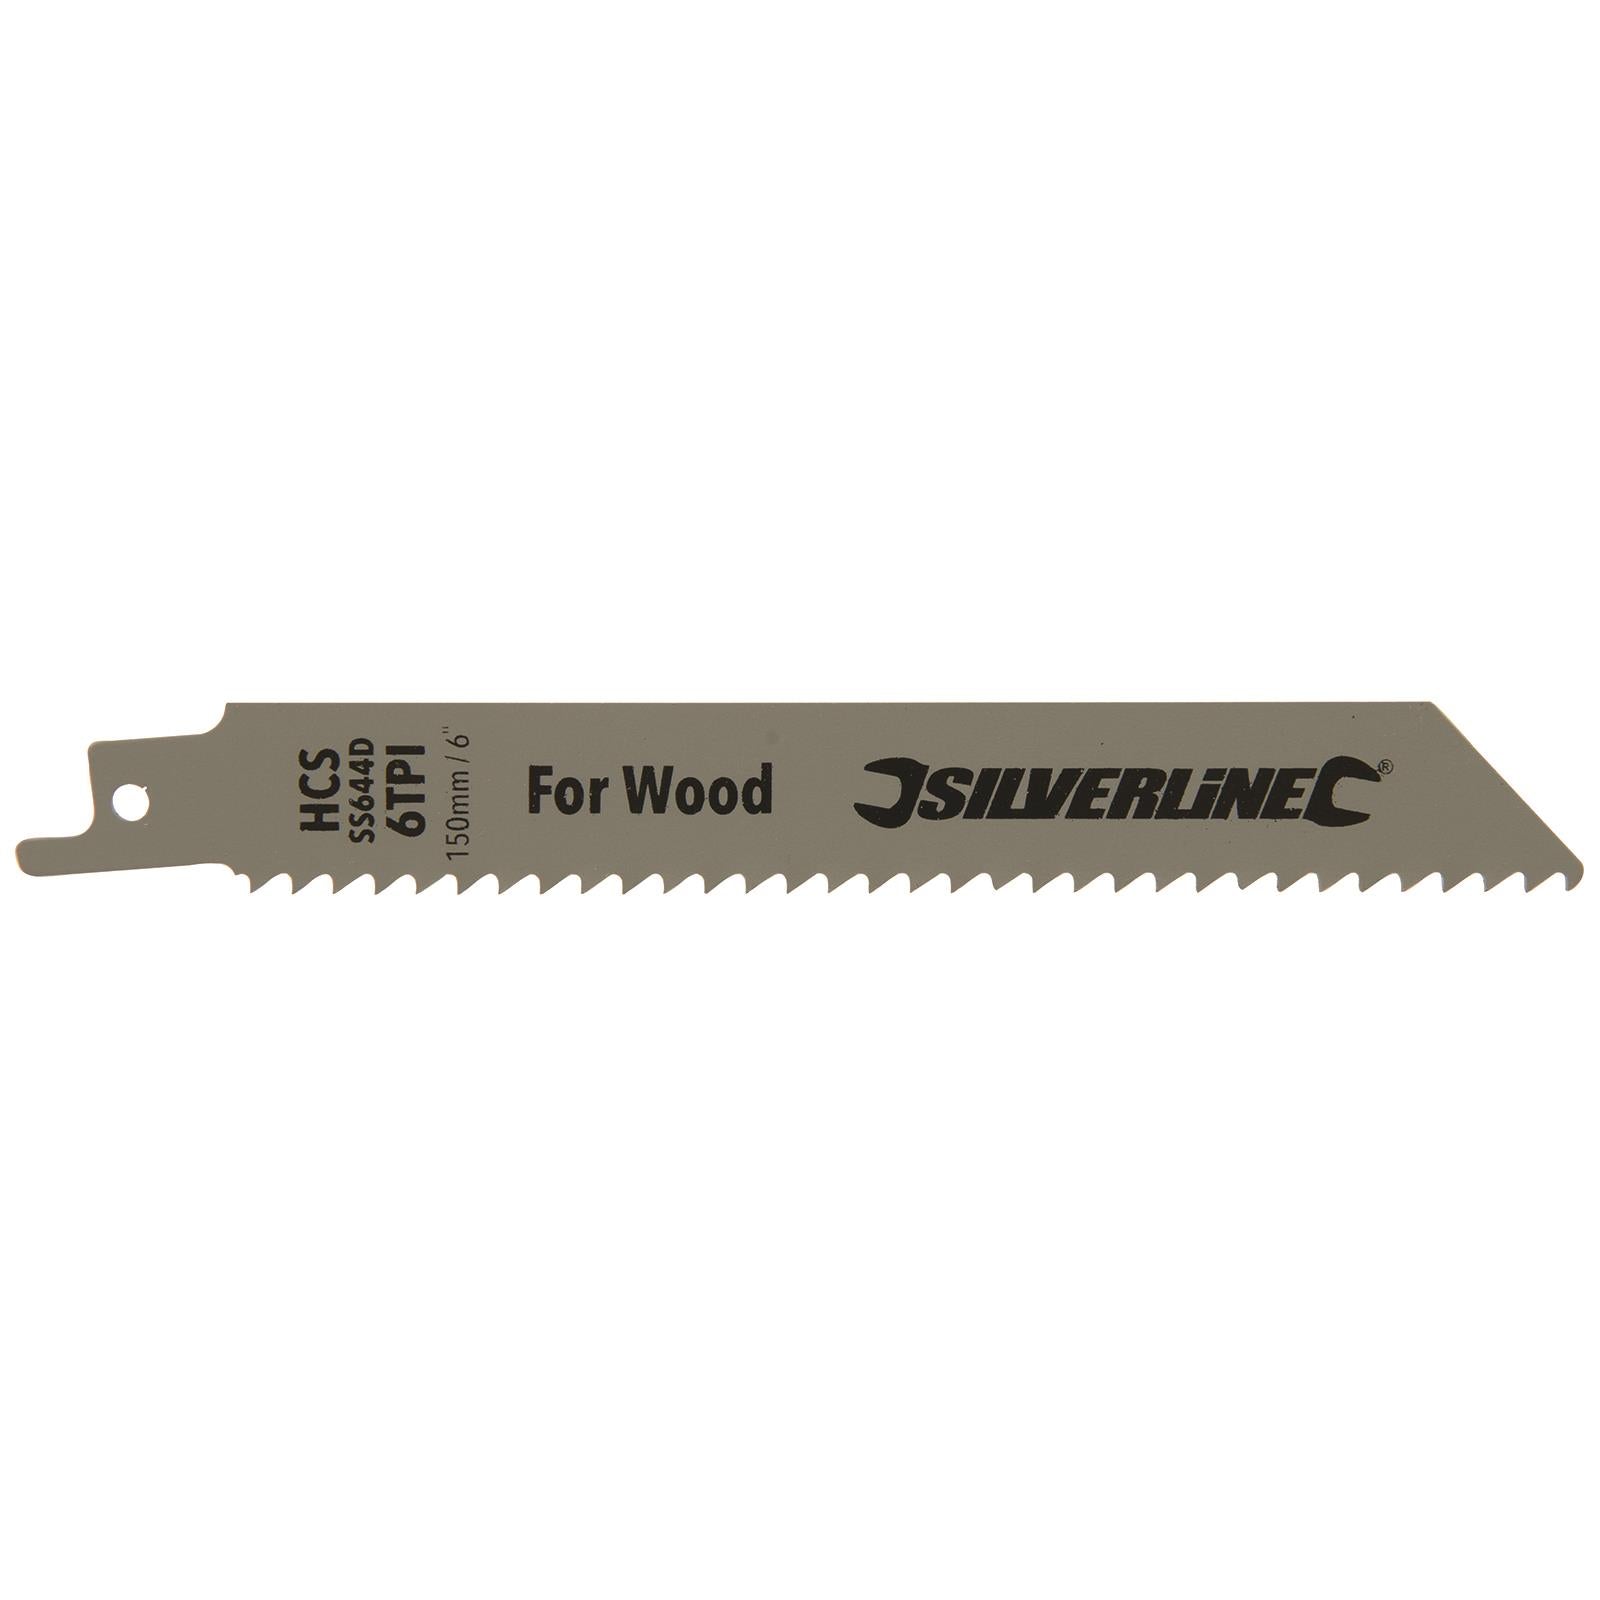 Silverline Recip Saw Blades for Wood HCS 5 Pack 6 TPI 150mm Cutting Blades